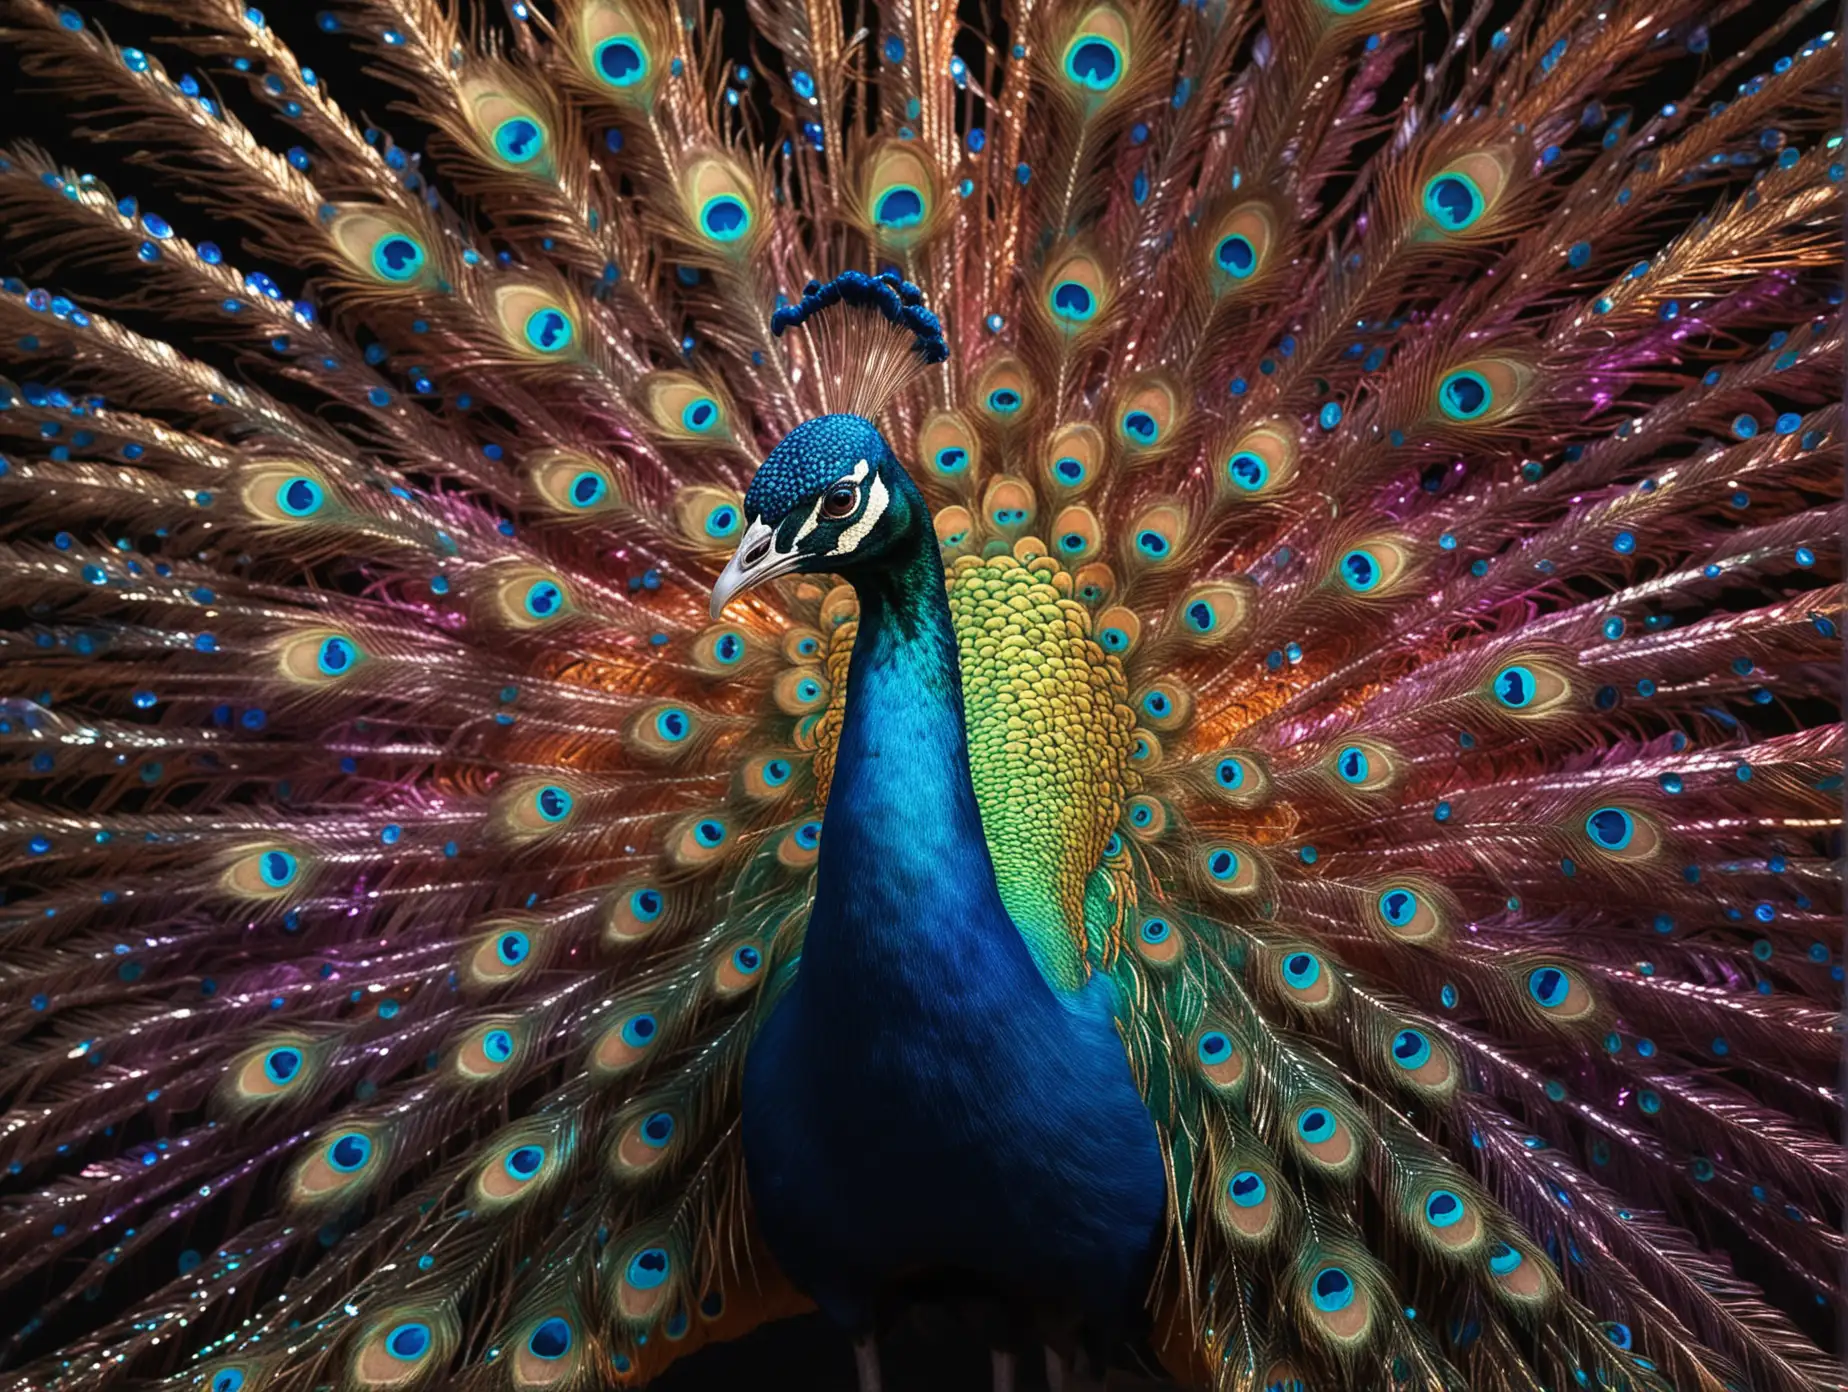 A striking 3D rendering of a vivid and vibrant peacock, showcasing its magnificent, iridescent plumage that seems to radiate energy. The conceptual art piece features the facing forward, looking directly at the viewer, with its tail spread out to display its brilliant colors and mesmerizing eye pattern. 